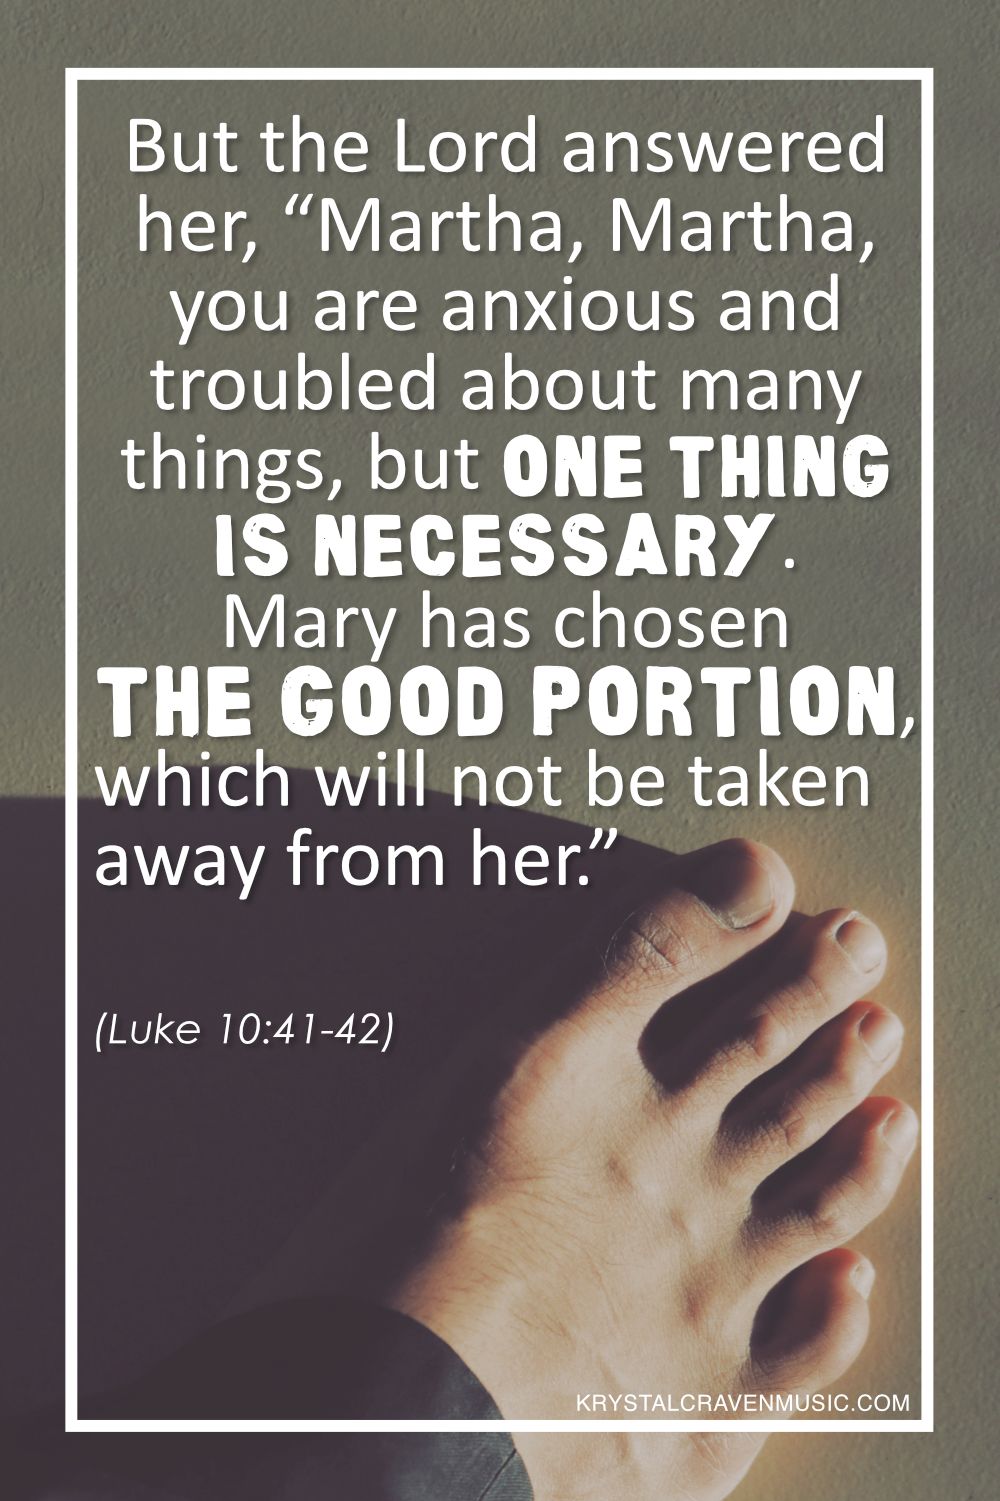 The text from Luke 10:41-42 "But the Lord answered her, “Martha, Martha, you are anxious and troubled about many things, but one thing is necessary. Mary has chosen the good portion, which will not be taken away from her.”" in a white font overlaying a photo taken from the perspective of a person looking at their right foot.